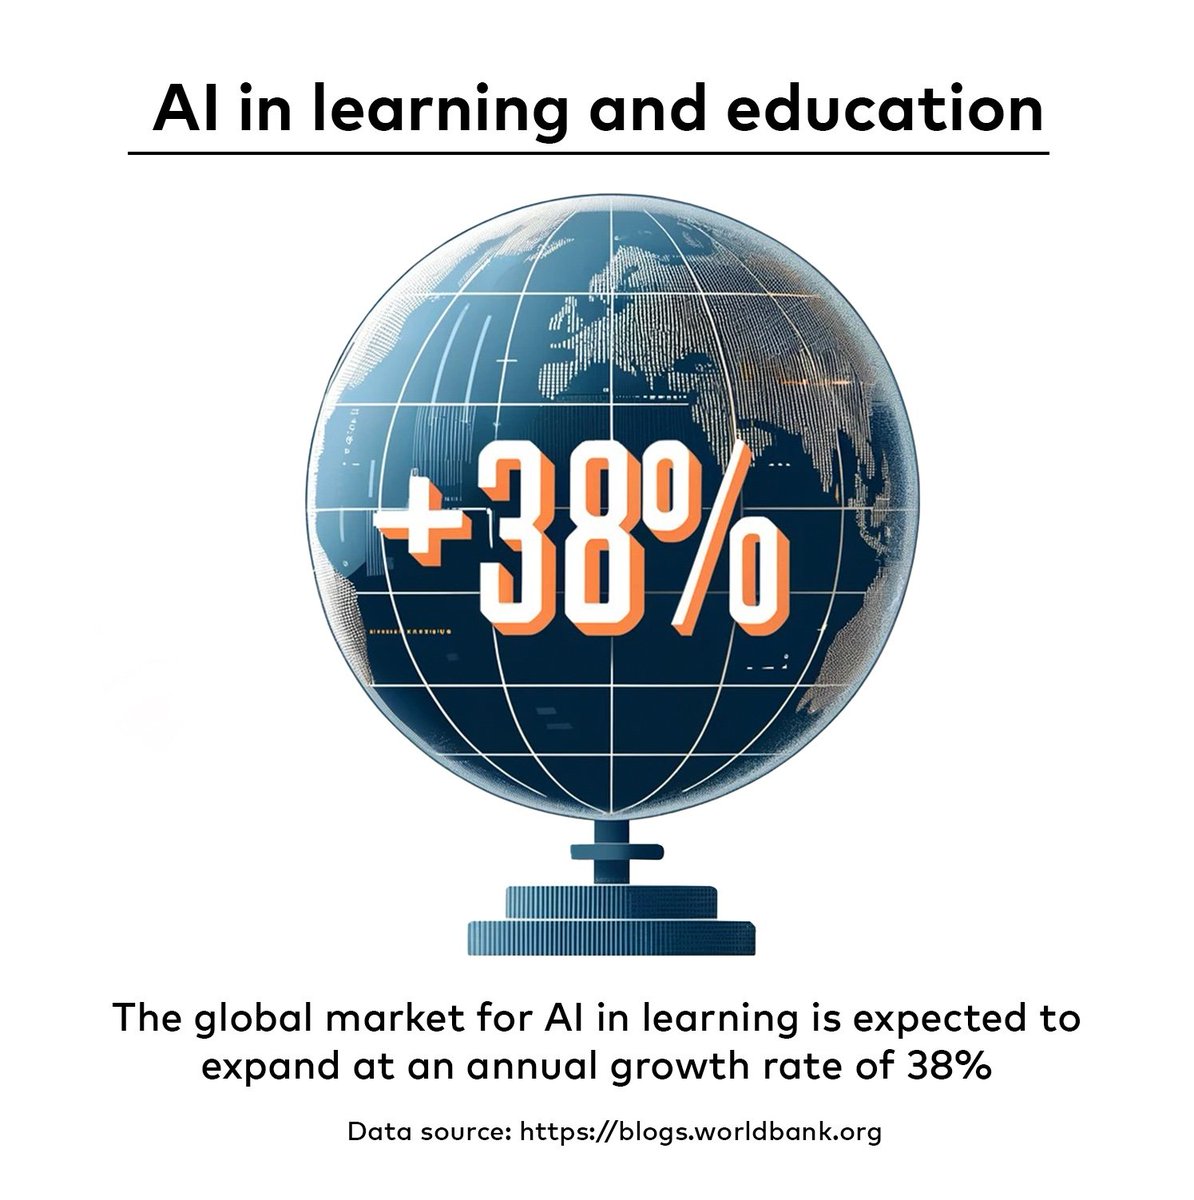 According to the World Bank, the global market for AI in learning and education is expected to expand at an annual growth of 38%. What does this mean for young people and the future of work?